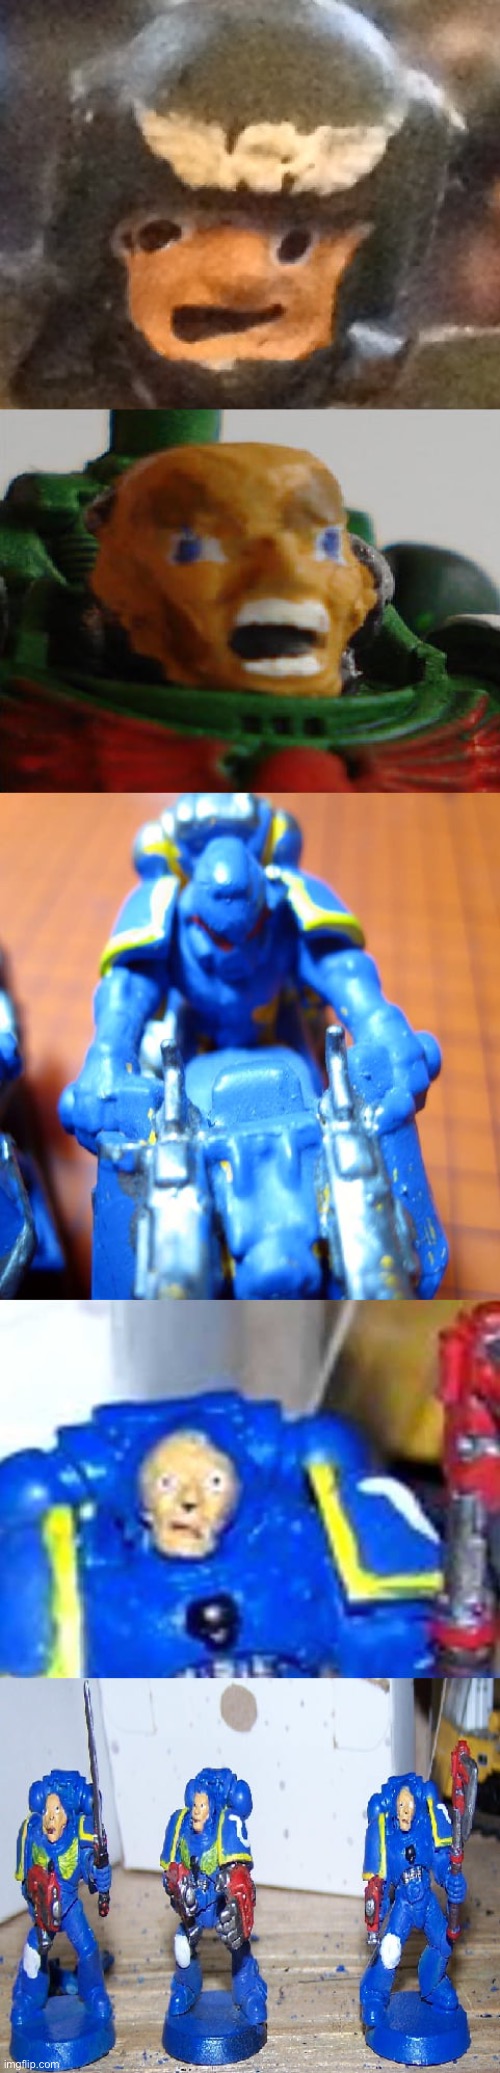 The worst paint jobs in history | image tagged in memes,warhammer40k | made w/ Imgflip meme maker